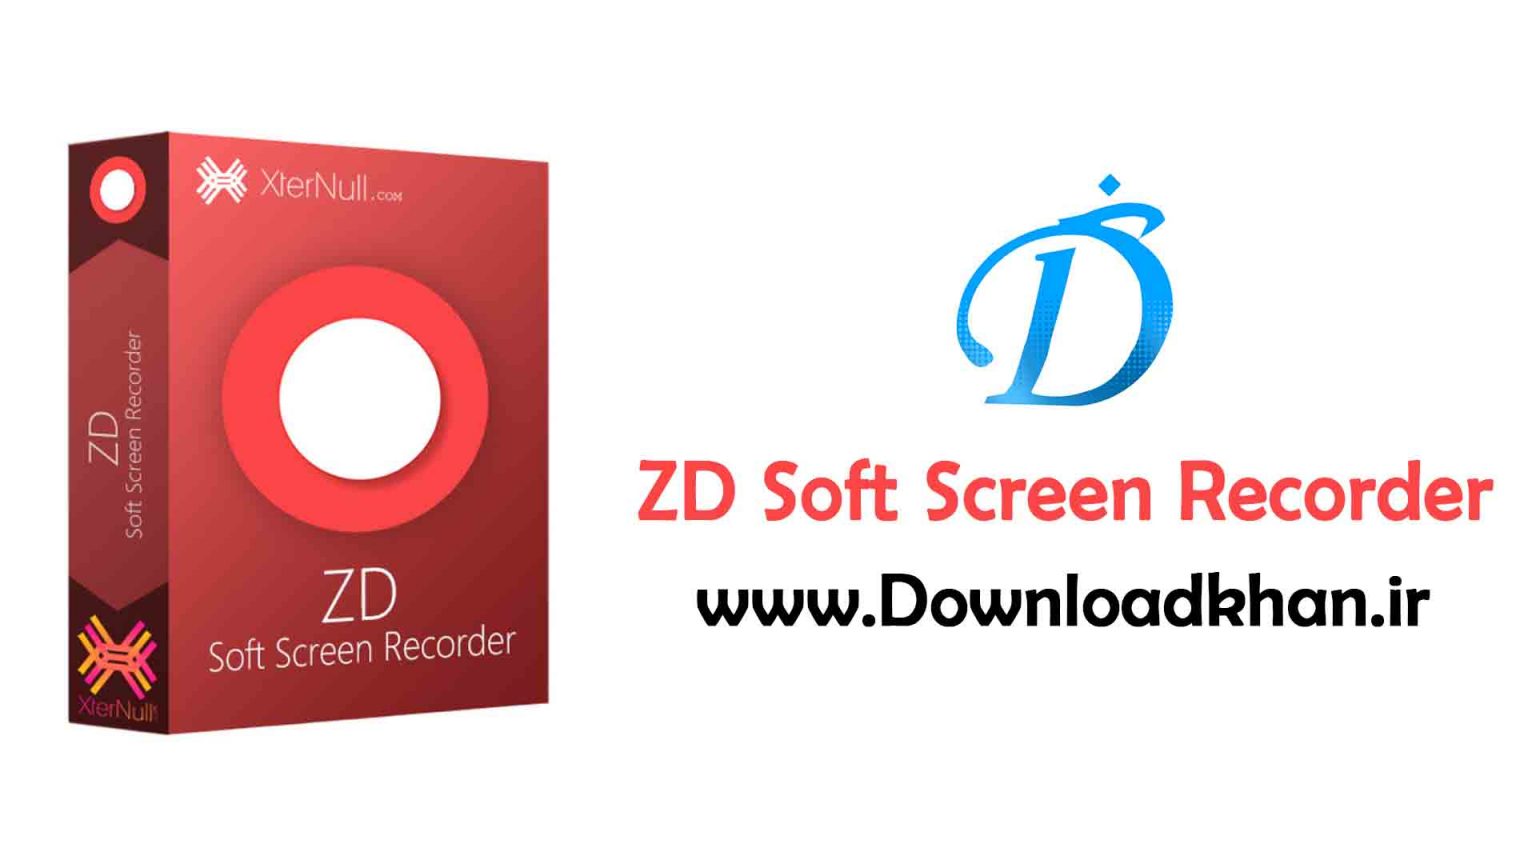 ZD Soft Screen Recorder 11.6.7 download the new version